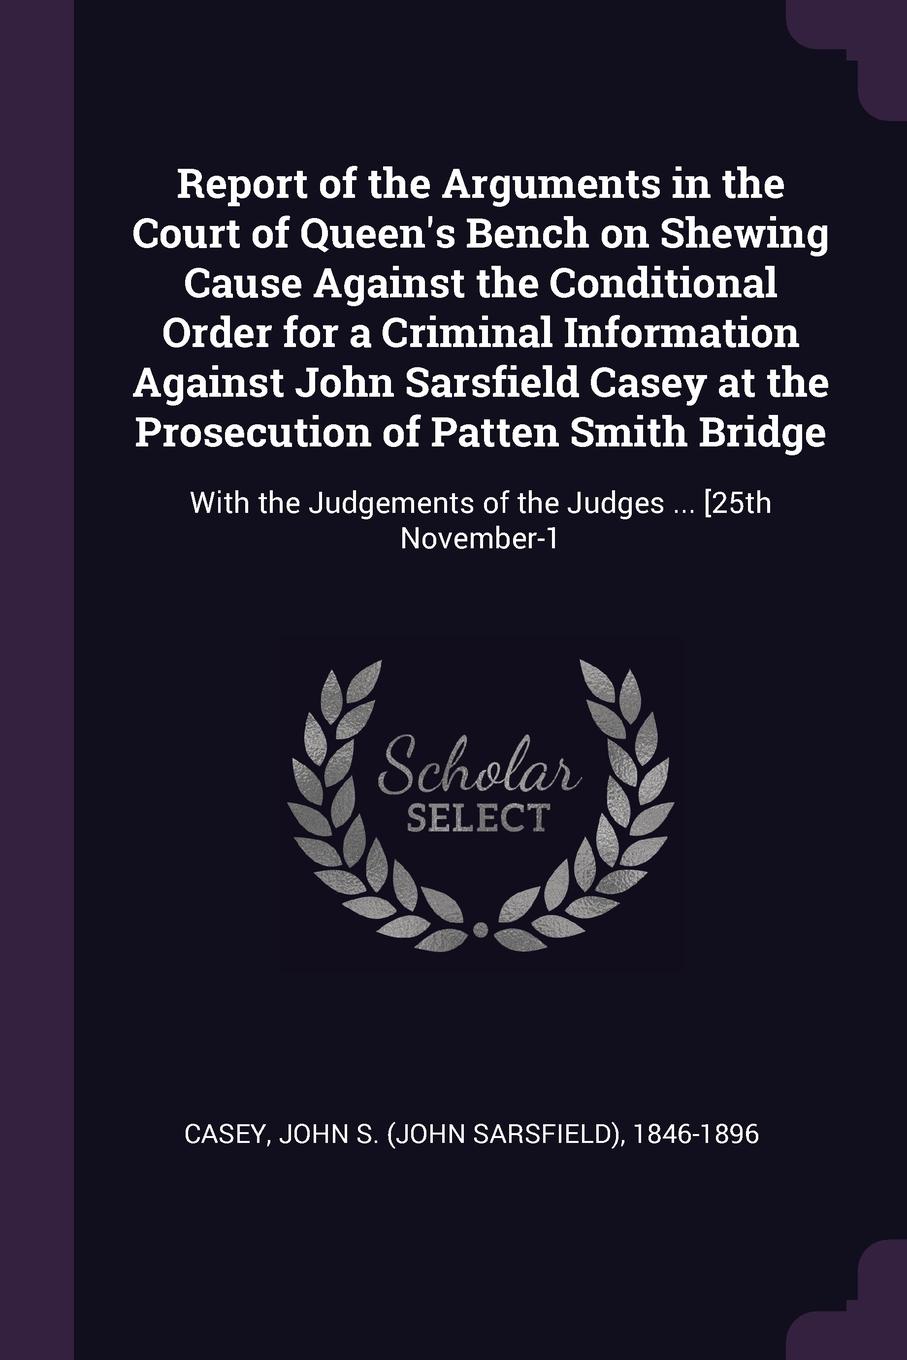 Report of the Arguments in the Court of Queen`s Bench on Shewing Cause Against the Conditional Order for a Criminal Information Against John Sarsfield Casey at the Prosecution of Patten Smith Bridge. With the Judgements of the Judges ... .25th Nov...